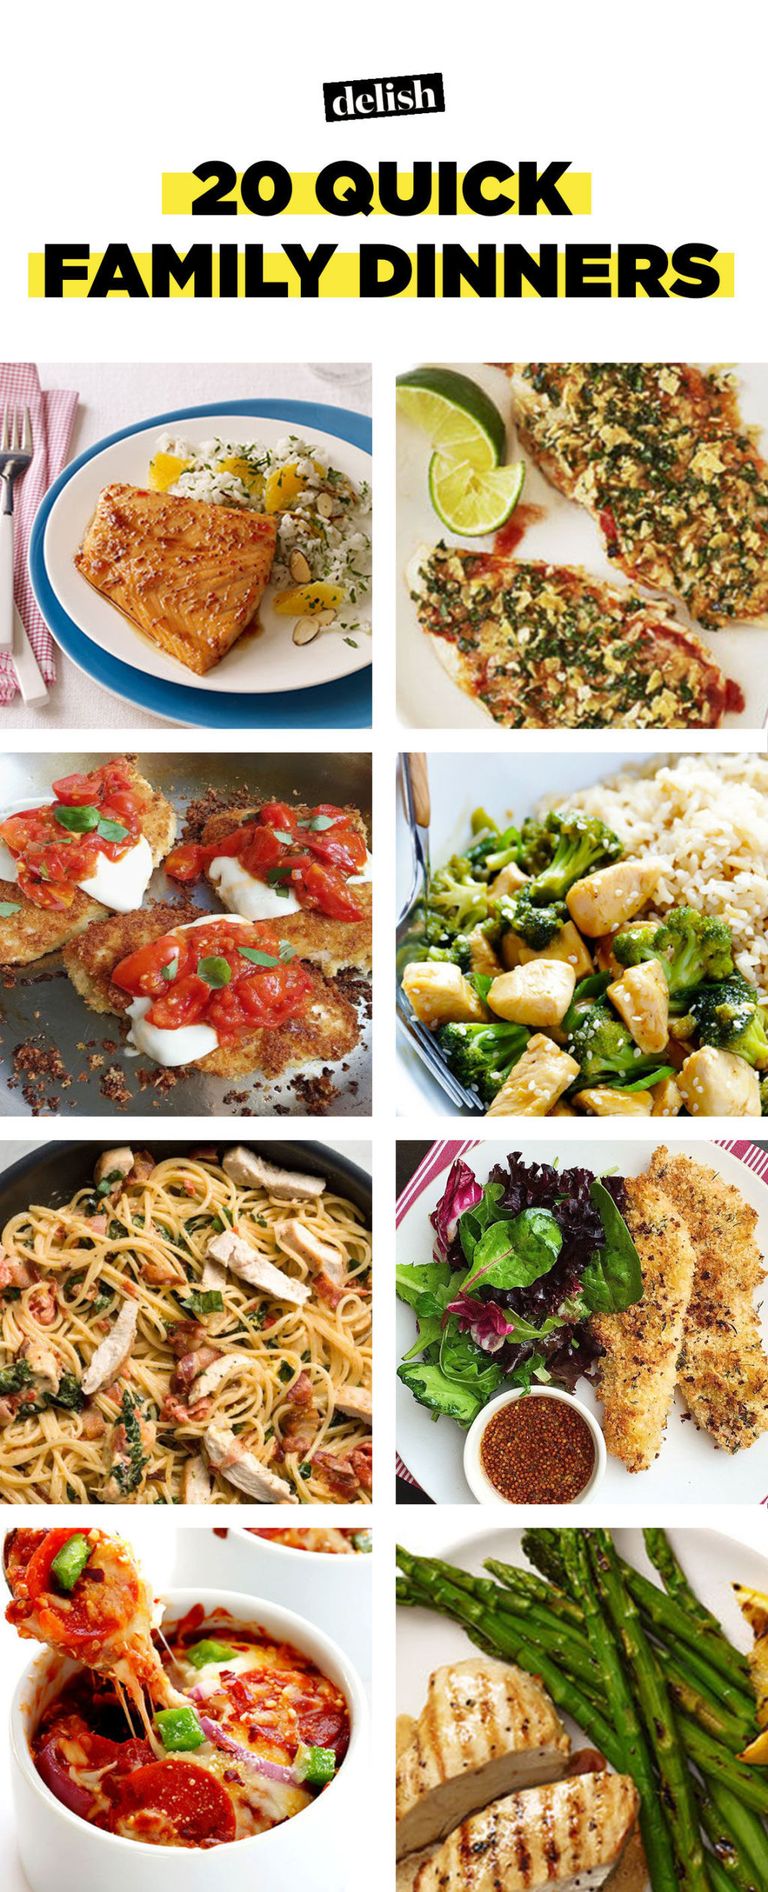 20 Quick & Easy Dinner Ideas - Recipes for Fast Family Meals—Delish.com